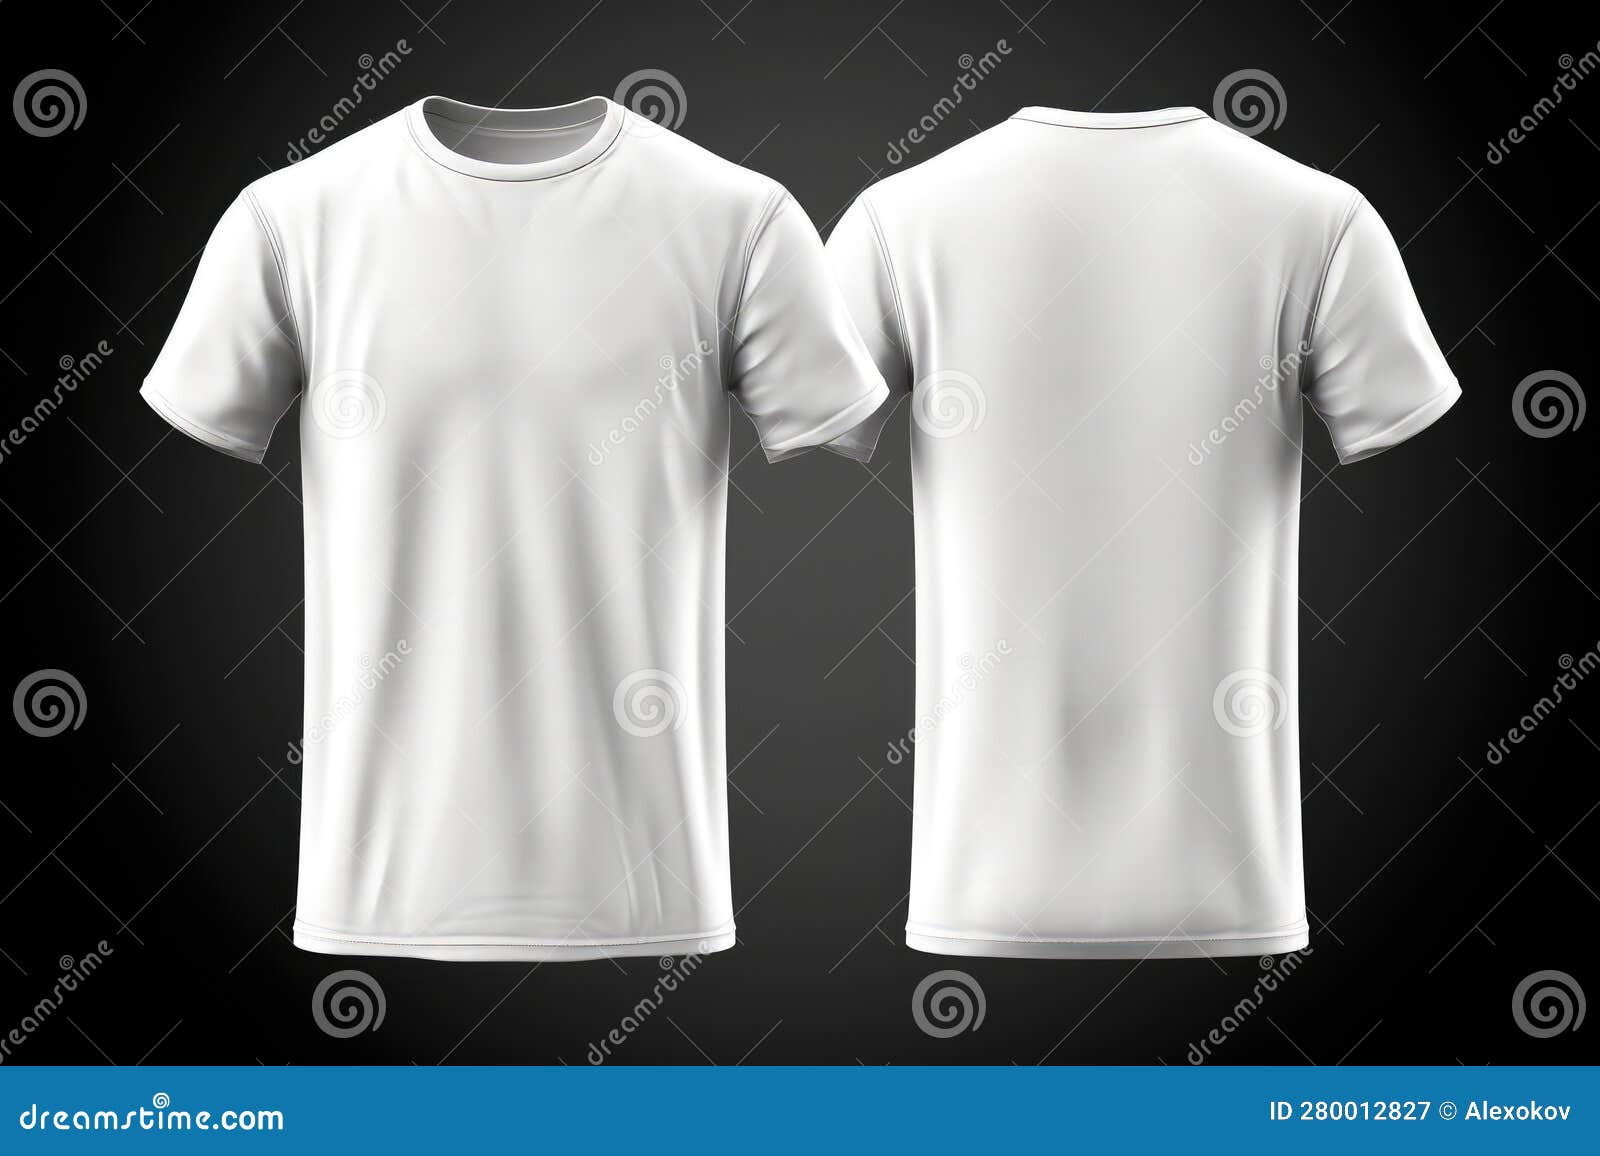 Monochromatic White Men S T-Shirt Template for Front and Back in ...